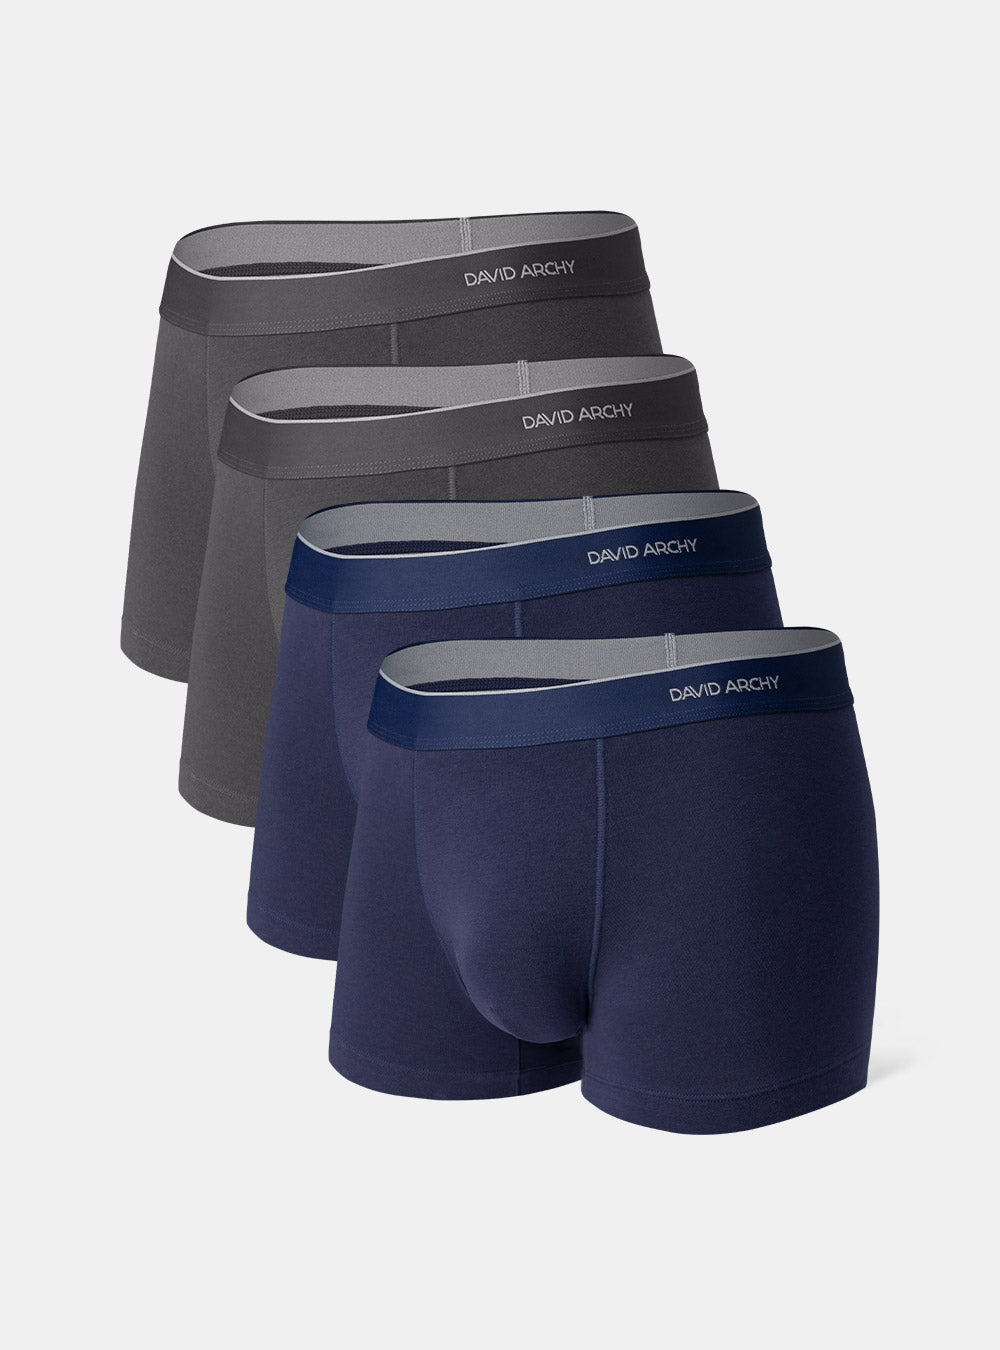 4 Packs Cotton Trunks with Pouch David Archy Soft Breathable Elastic  Underwear